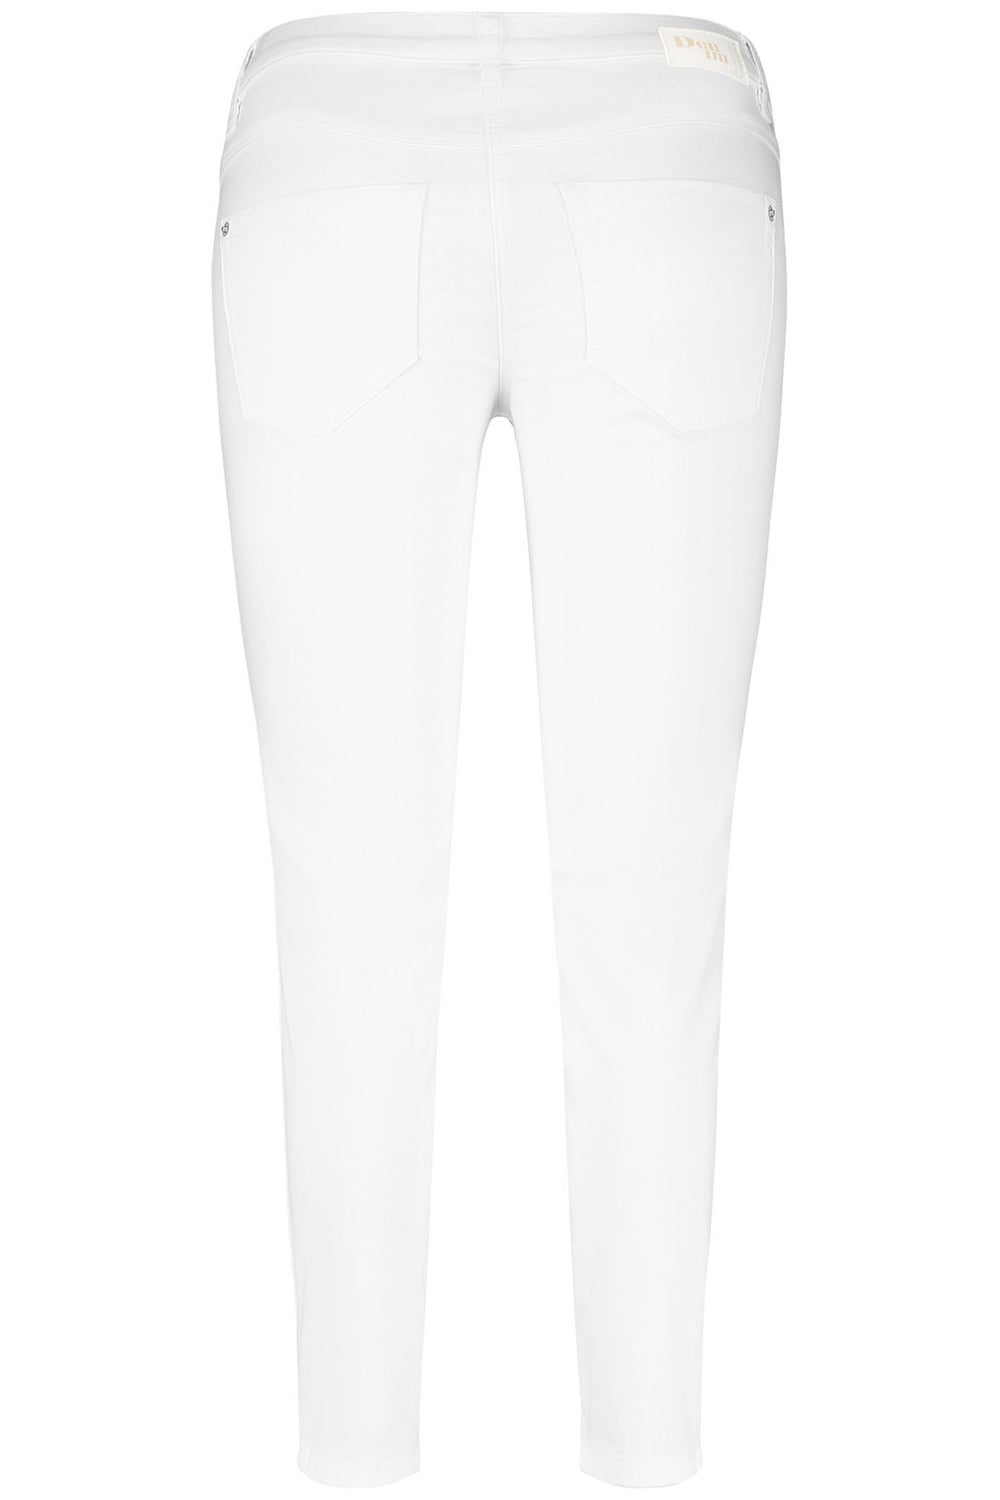 Gerry Weber 925055-67965 White 5 Pocket Jeans - Dotique Chesterfield